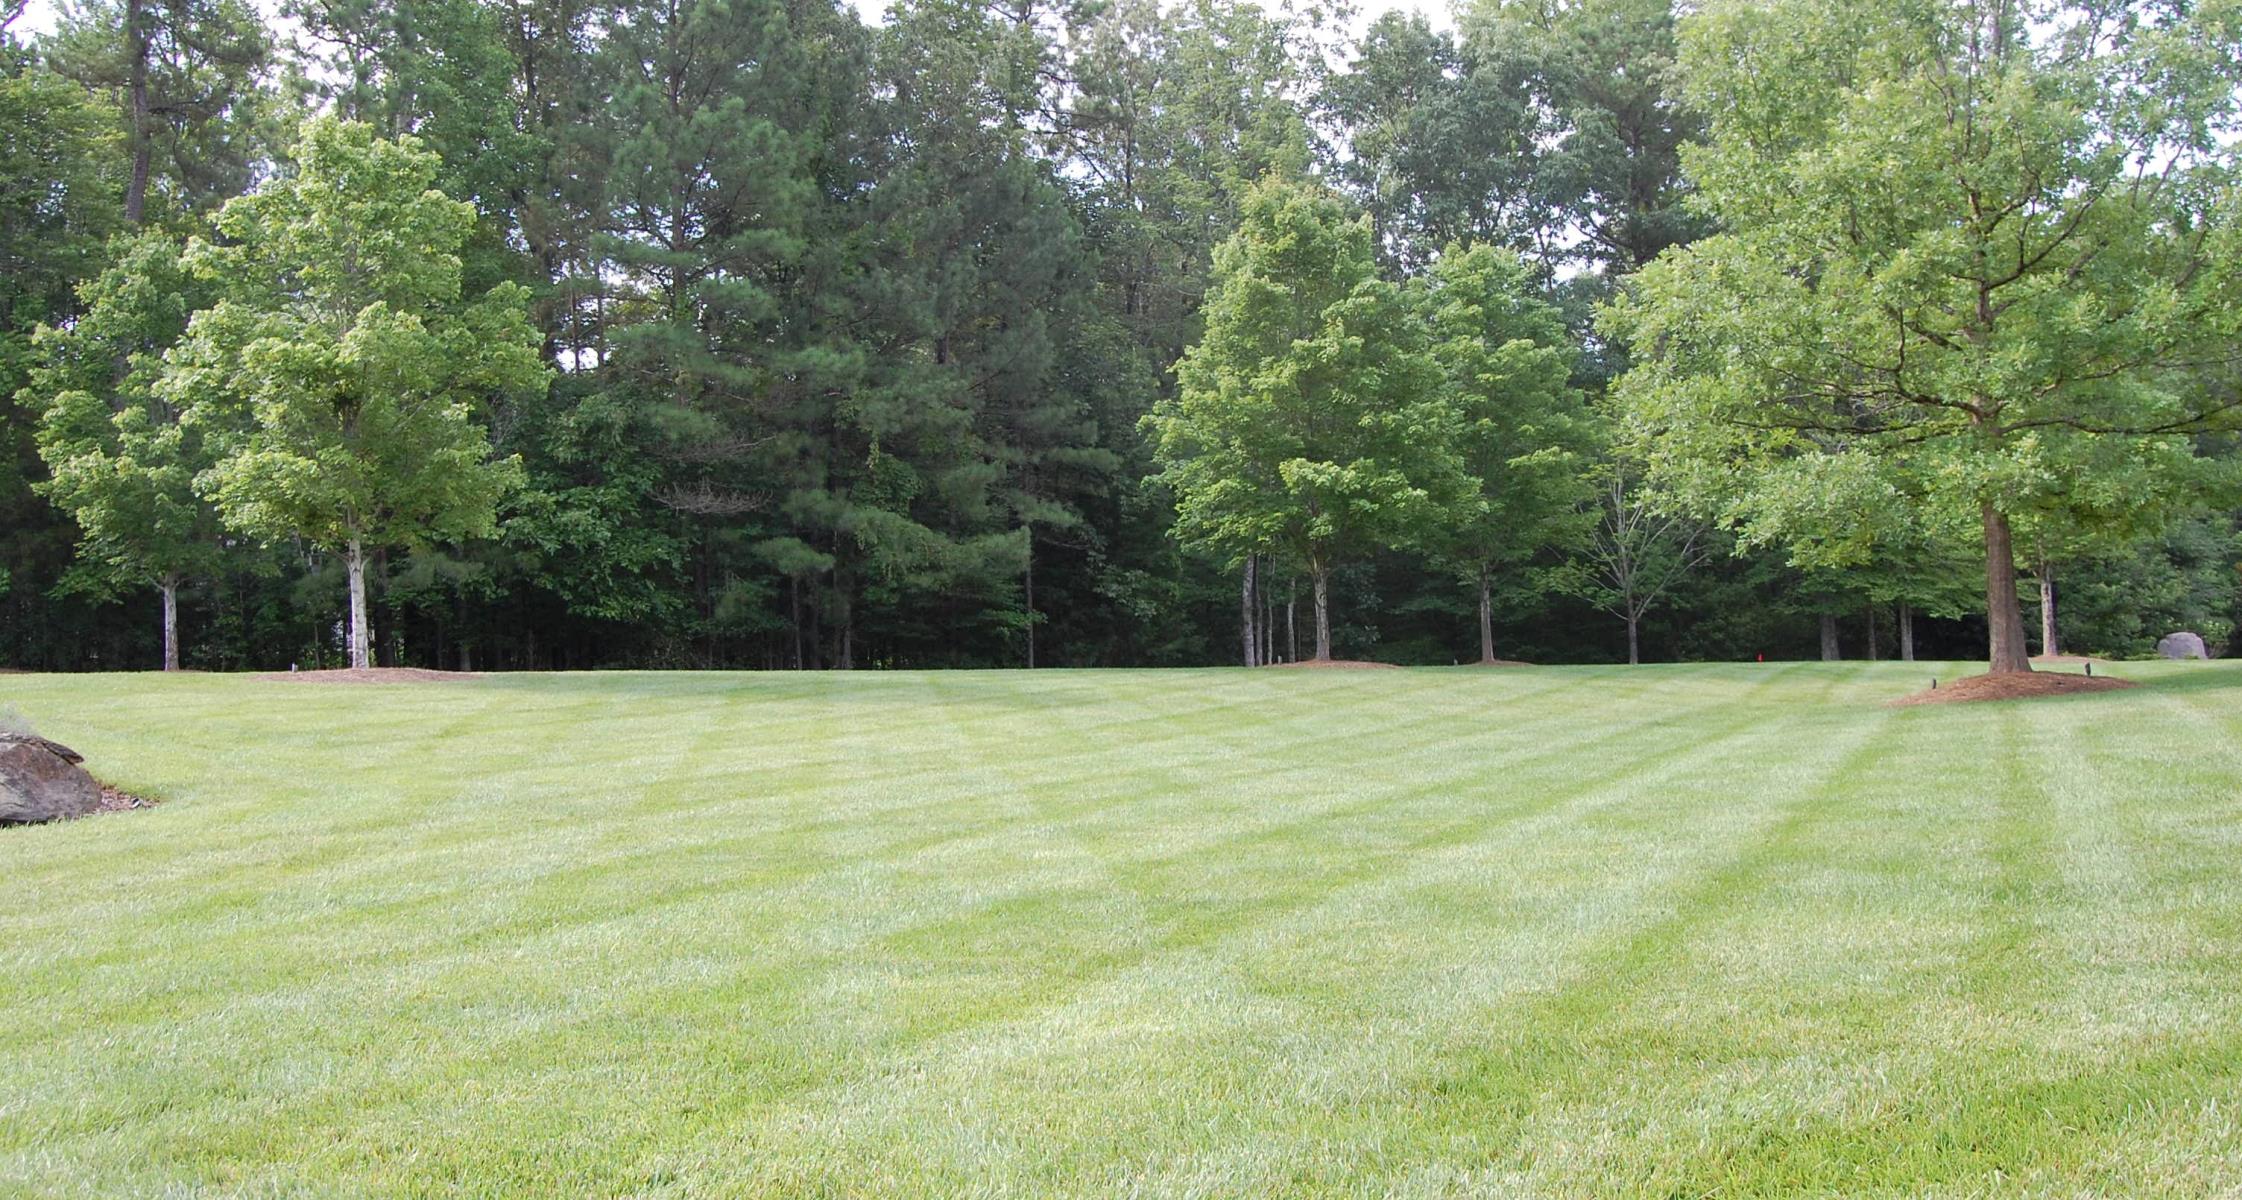 Should you choose Fescue or Bermuda for your lawn?